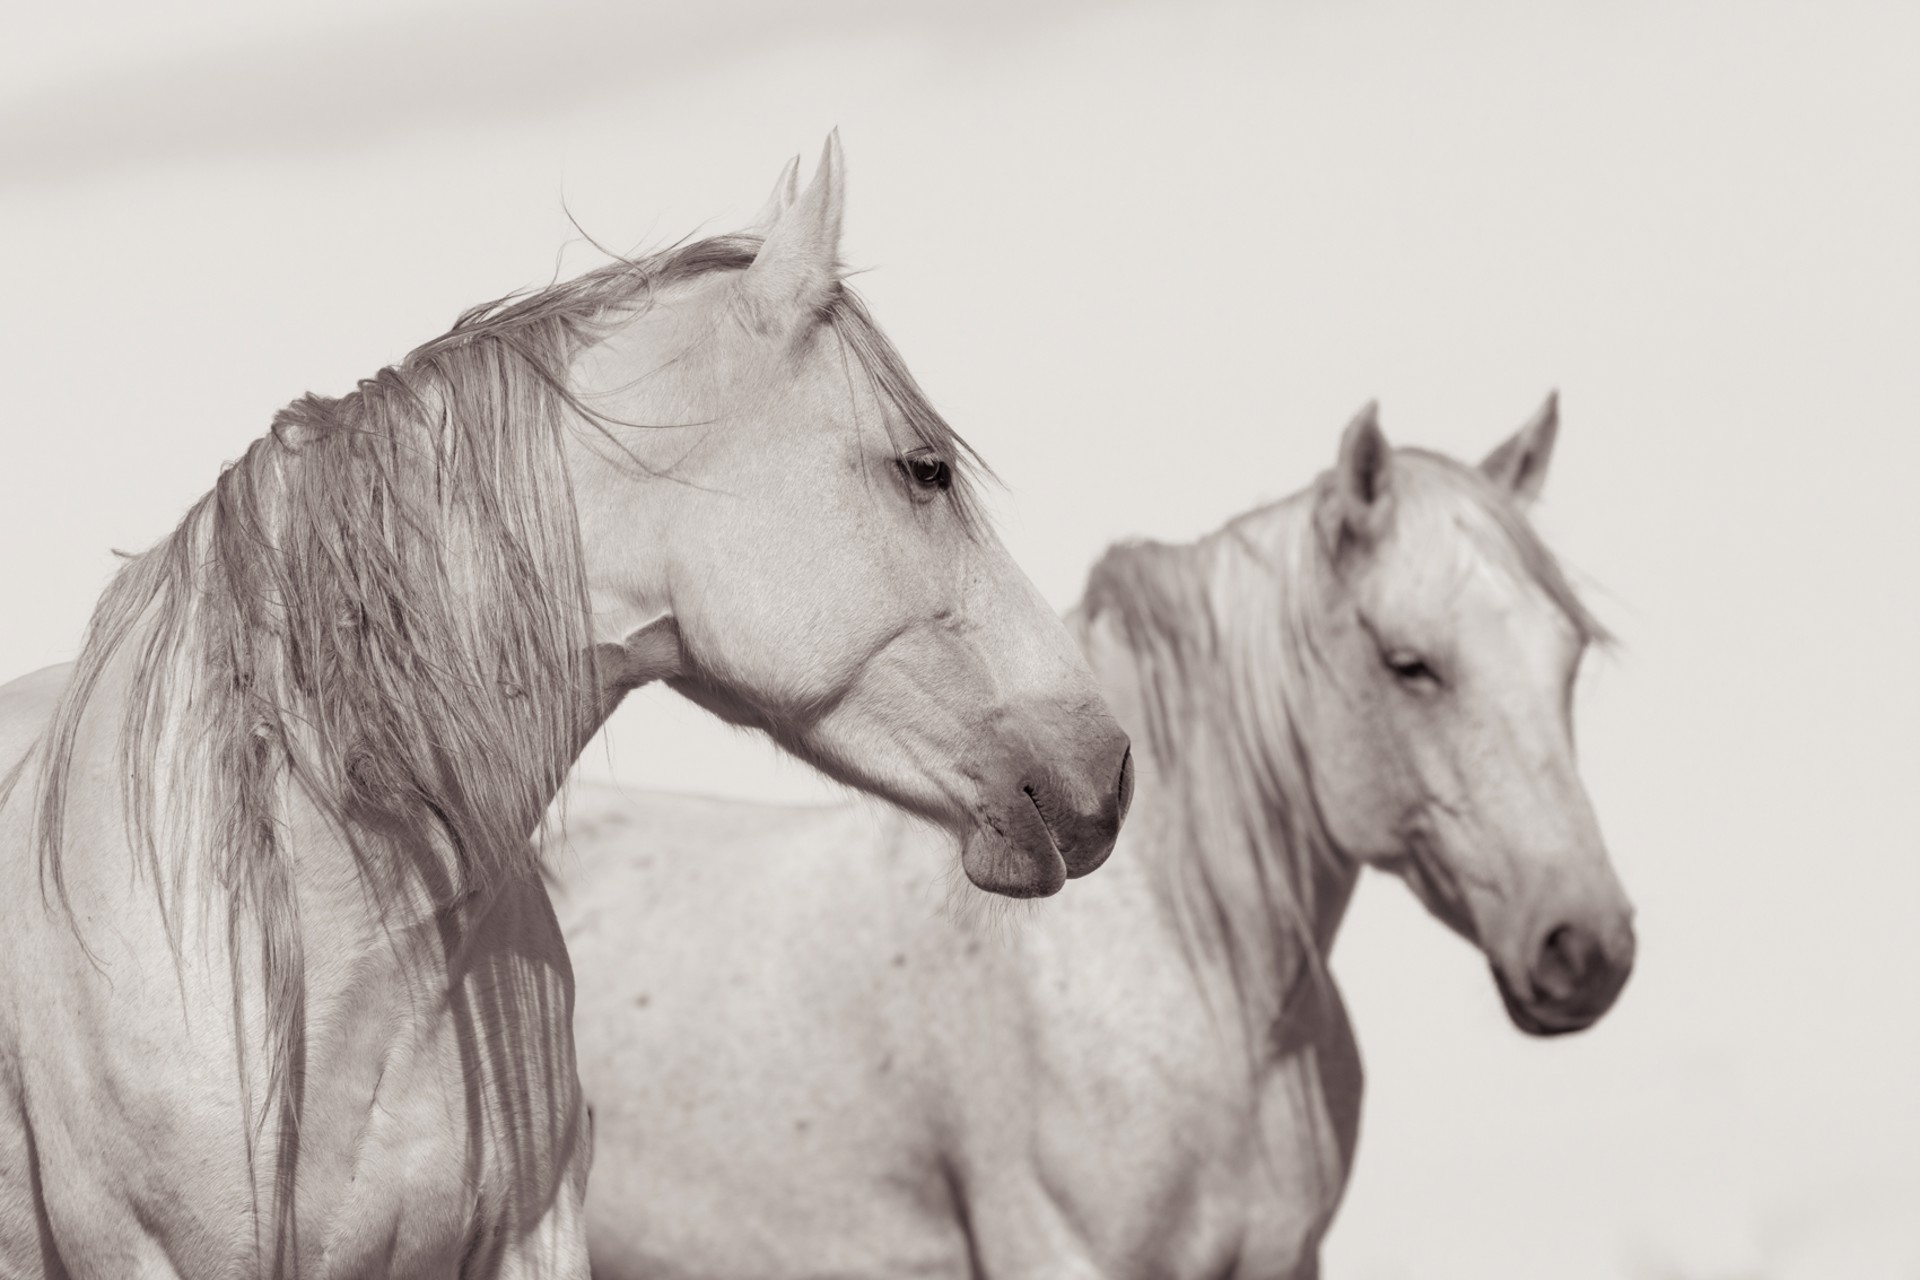 Sepia Toned Black And White Photograph Of Two Female White Horses